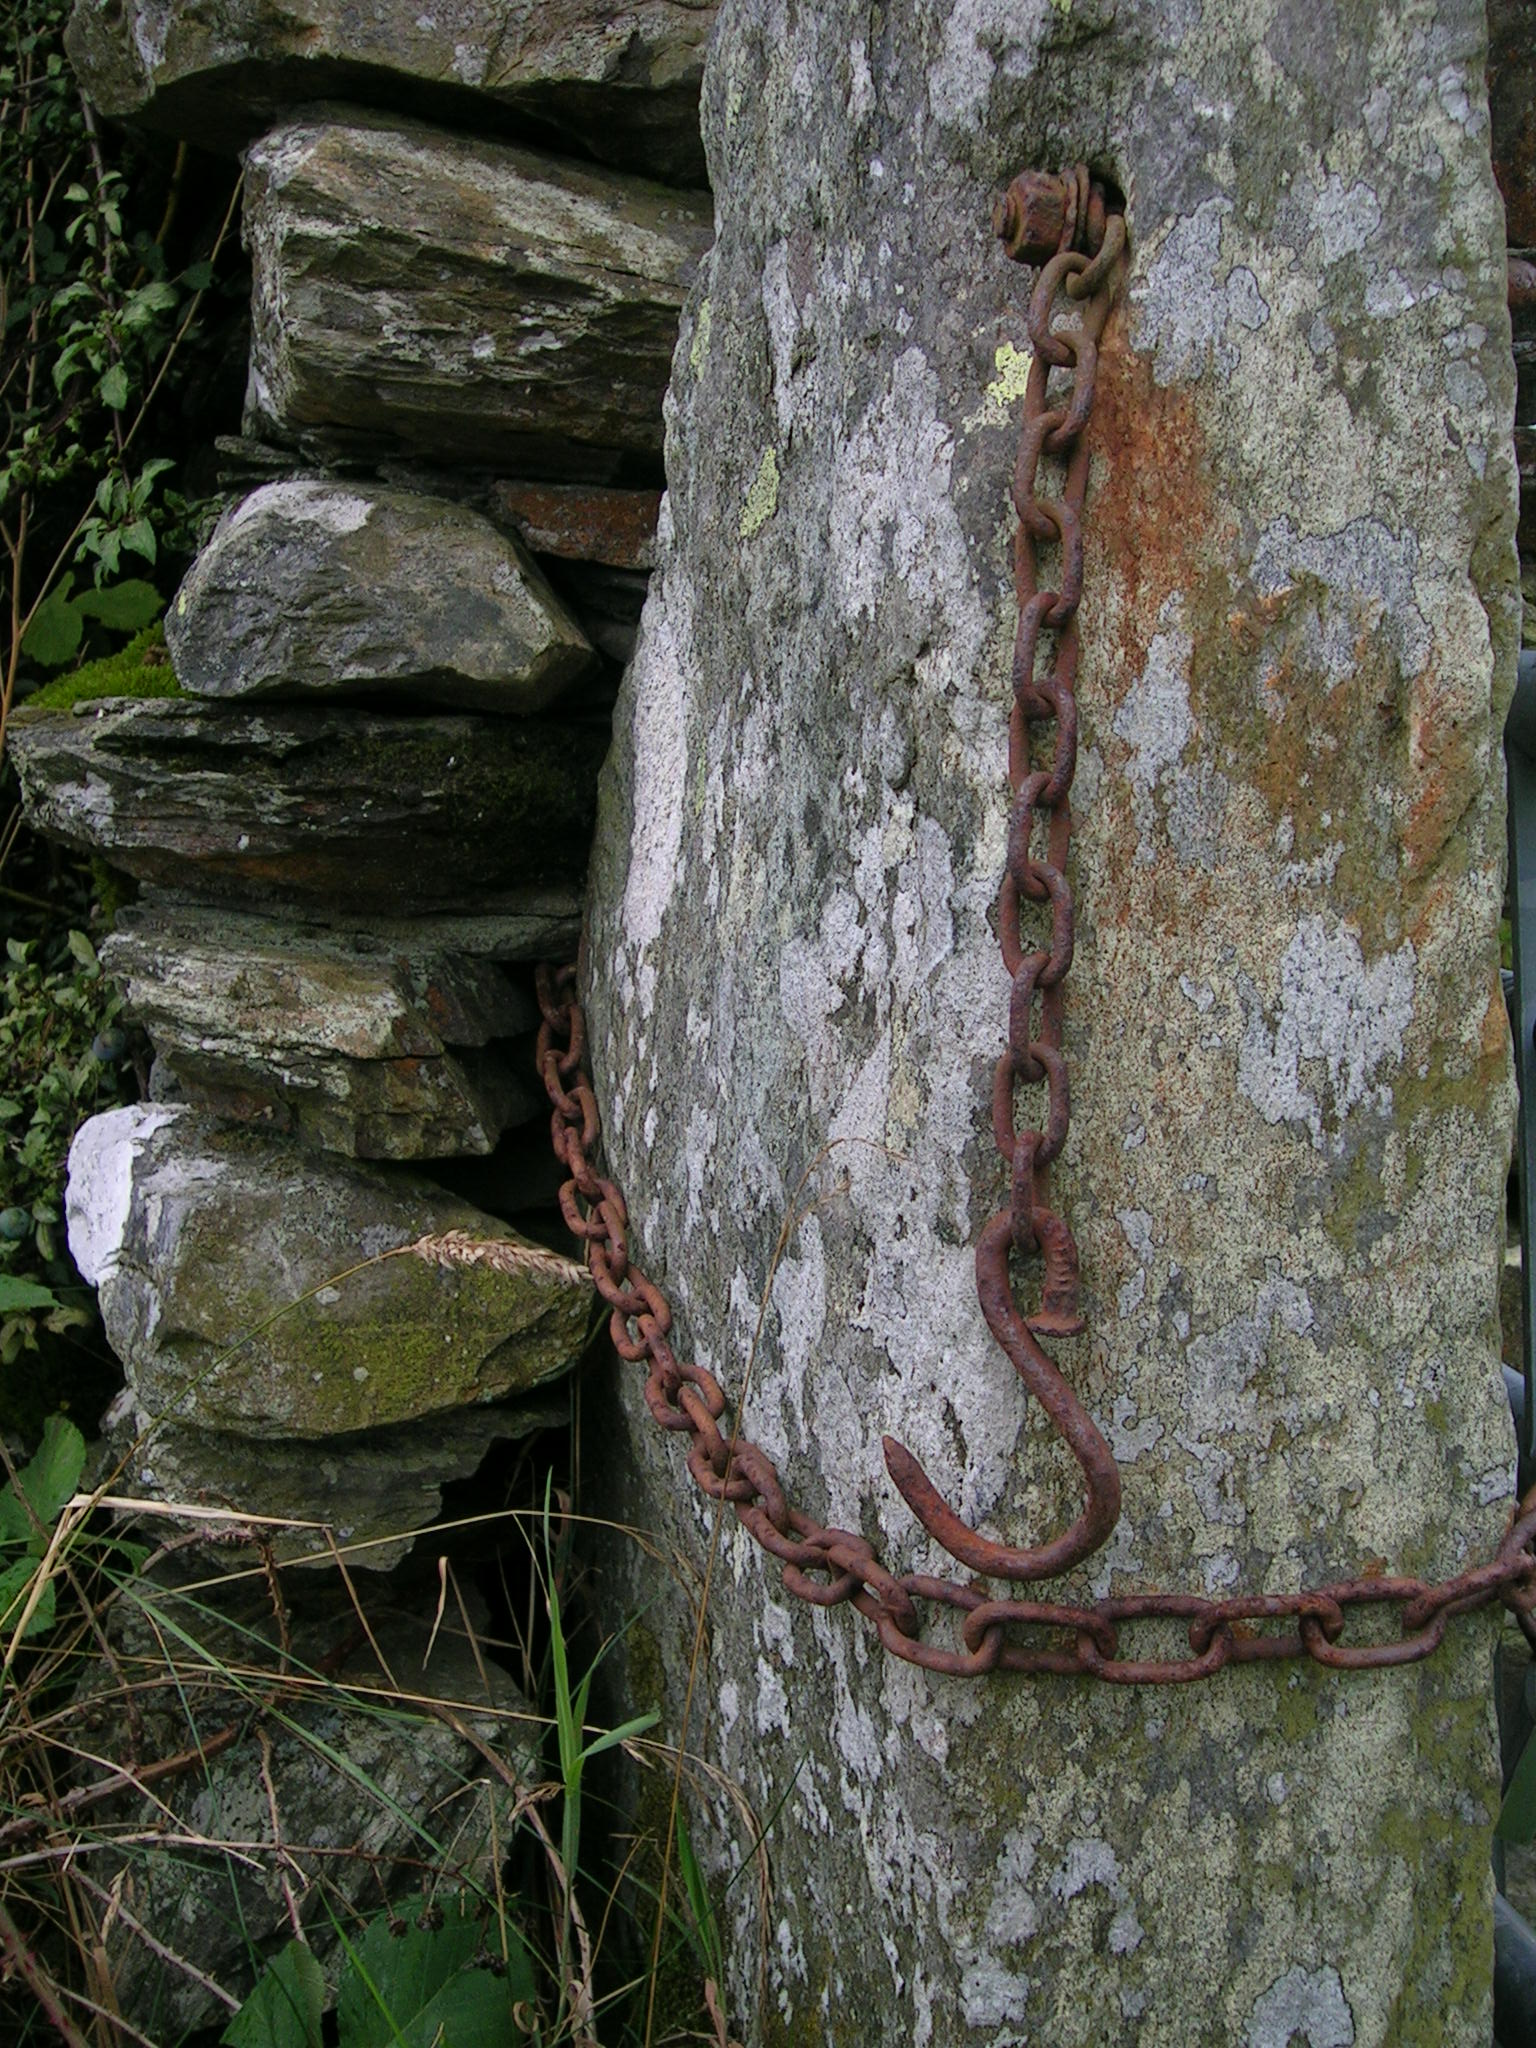 On walks in Wales there are old things to be found, rocks, chains, hooks